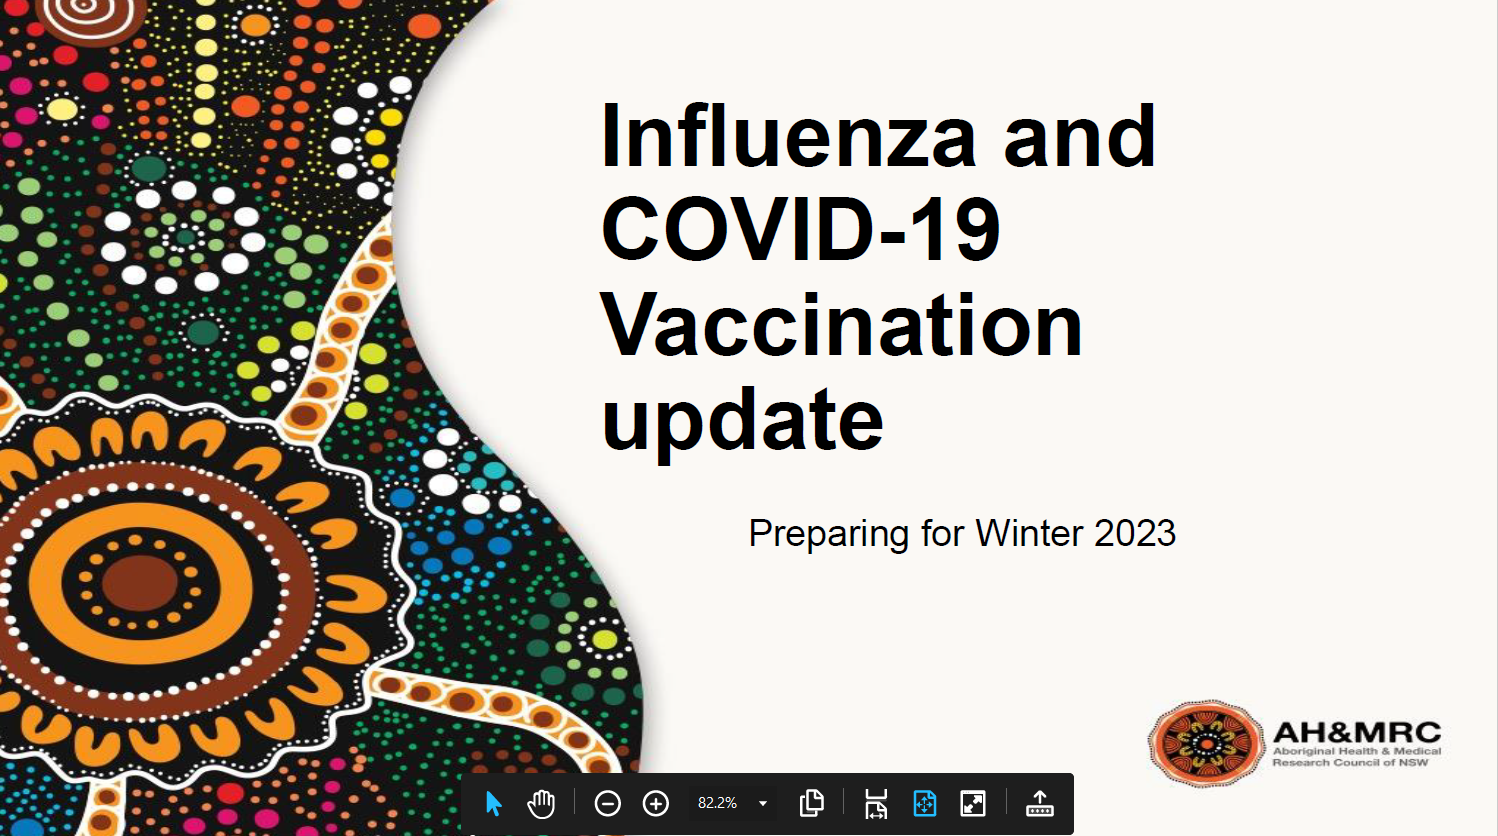 AH&MRC Influenza and COVID-19 Vaccination Update 2023